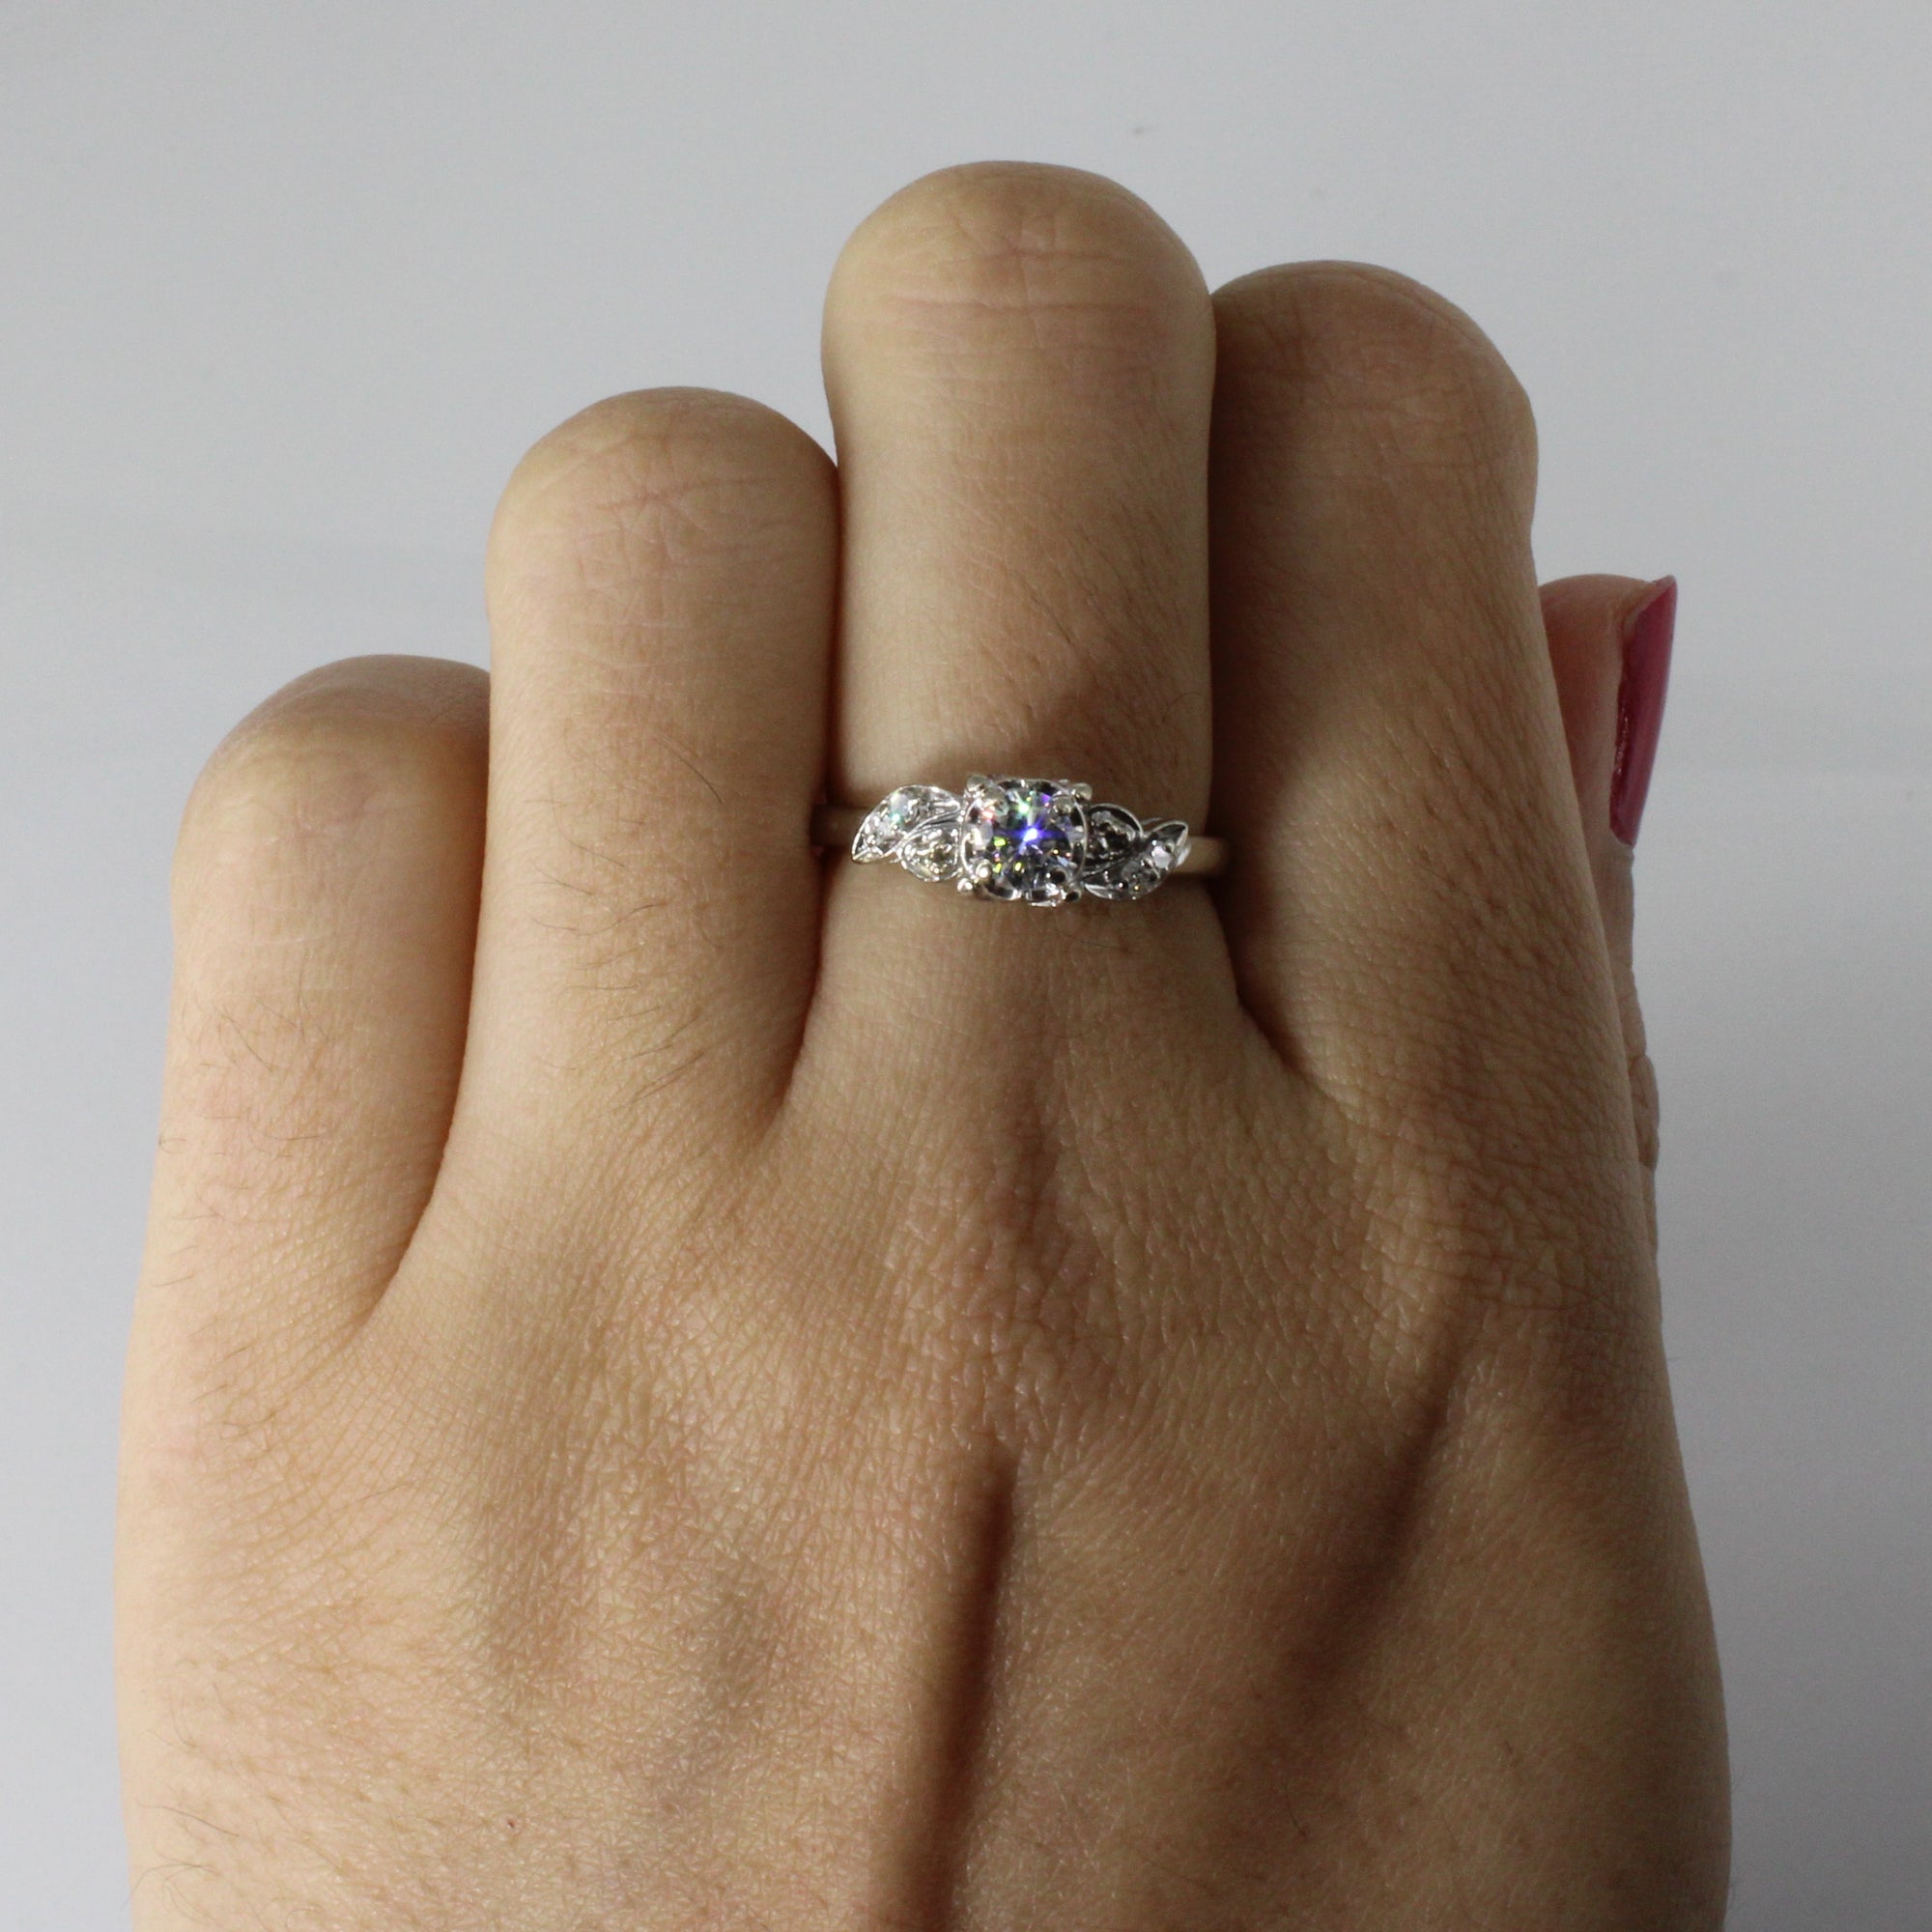 Solitaire with Accents Diamond Ring | 0.32ctw | SZ 6.75 |